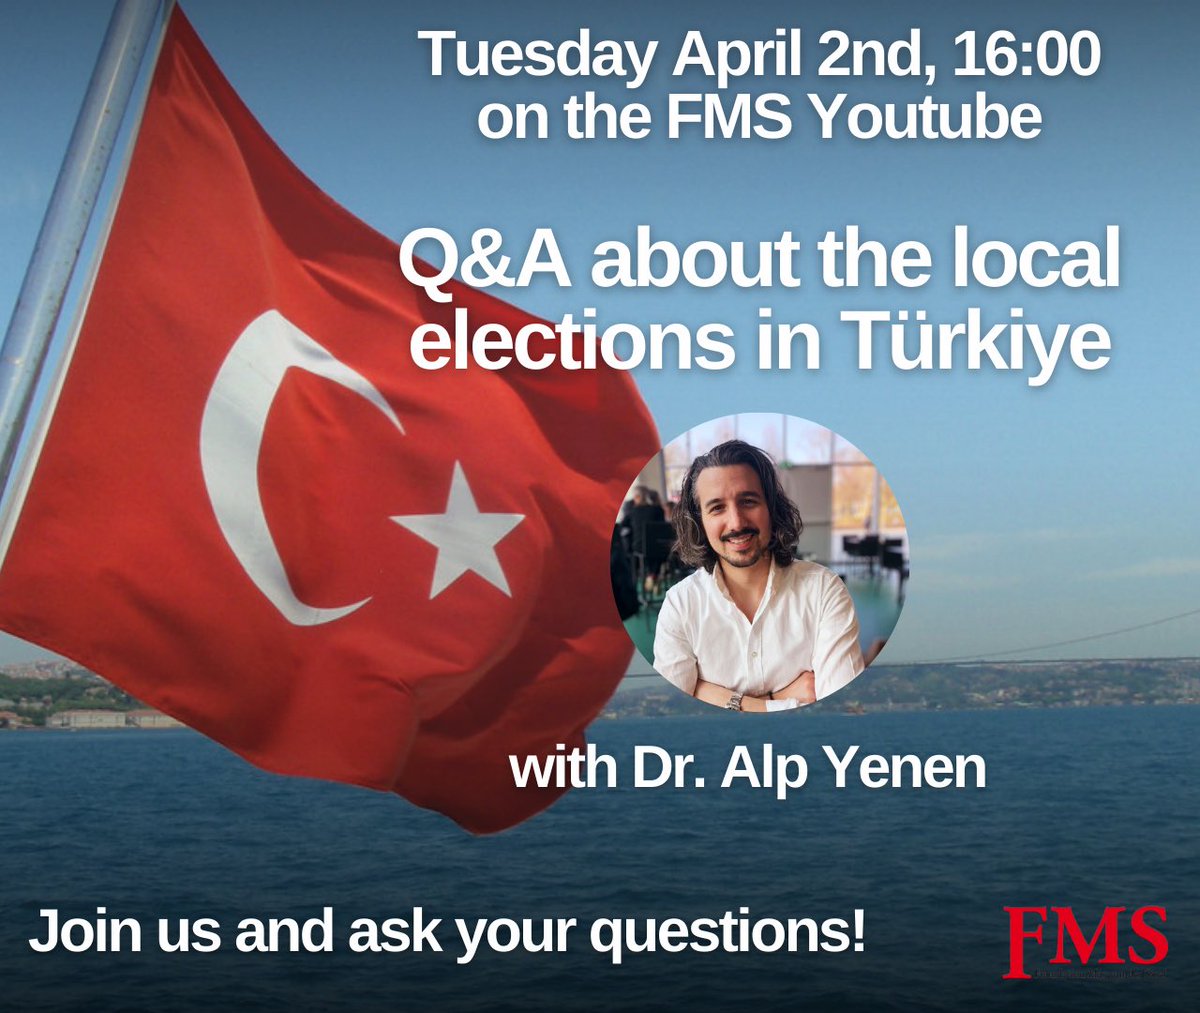 Upcoming Sunday, March 31st, voters in Türkiye will head to the polls to elect mayors and administrators in local elections 🇹🇷 We will discuss these elections and the state of democracy in Türkiye with university lecturer @alp_yenen